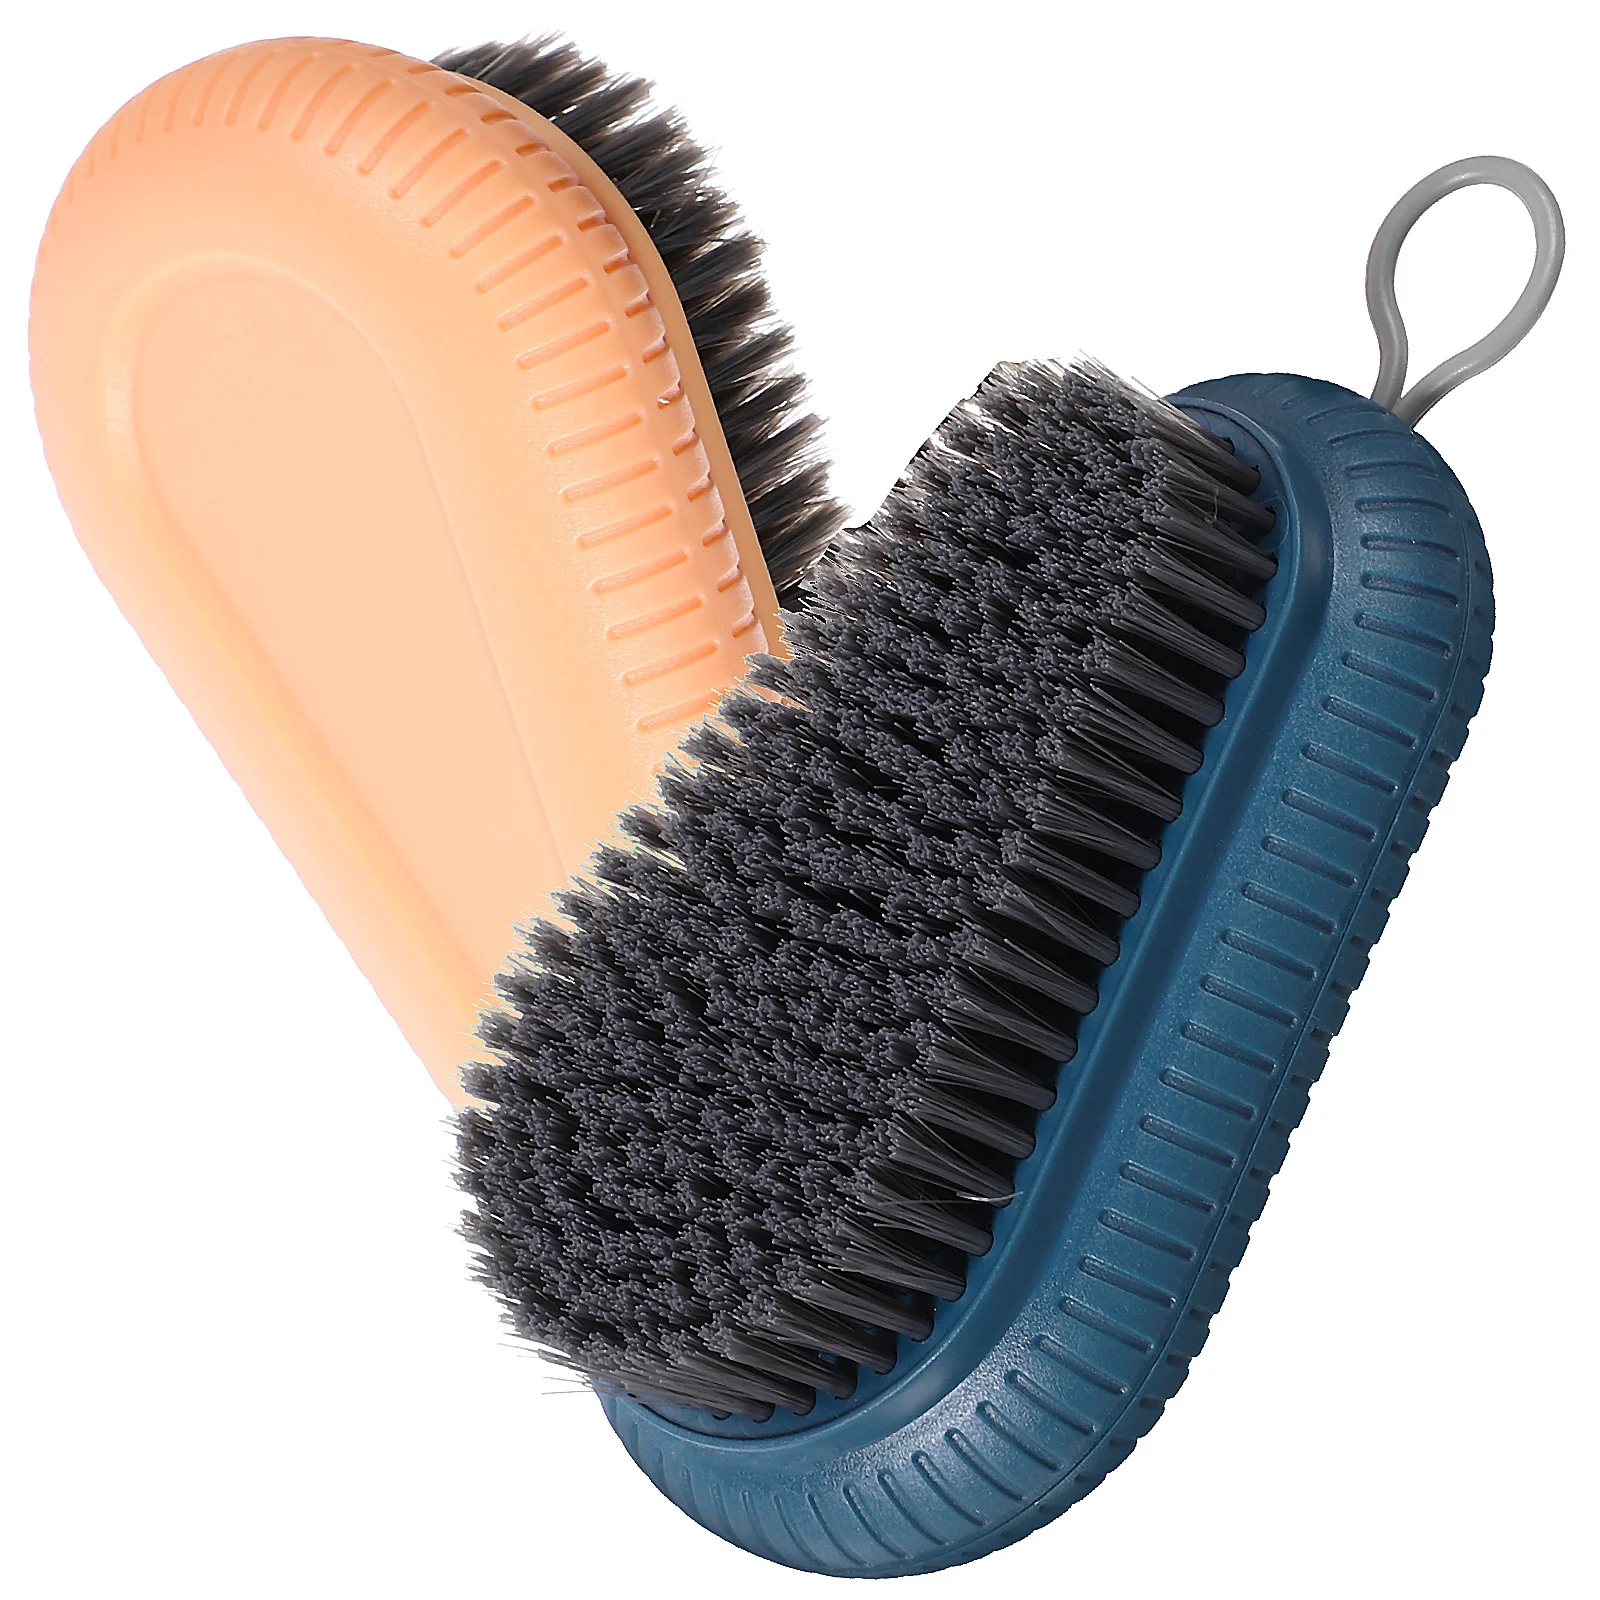 

2 Pcs Plastic Soft Hair Laundry Shoe Scrubber Brush Clean Cleaning Brushes Household Stains Polishing